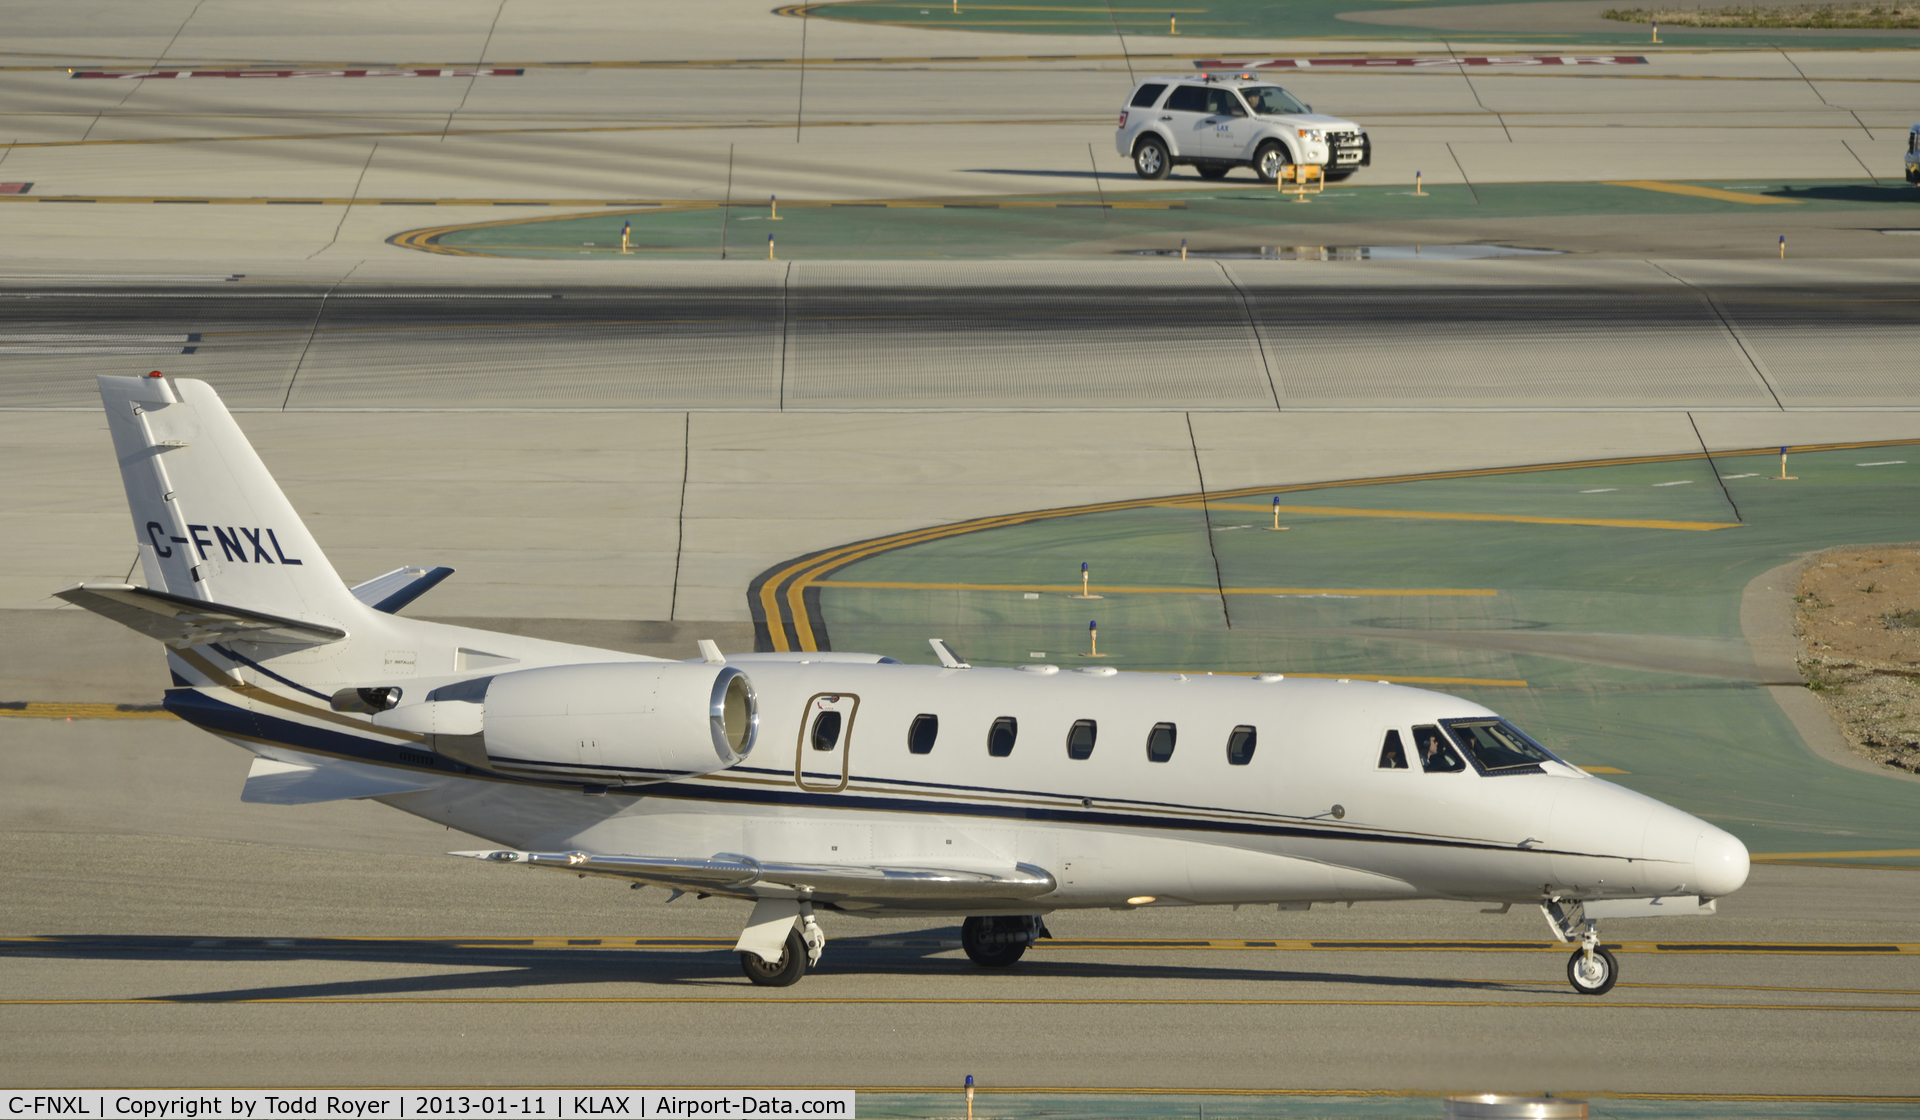 C-FNXL, 2007 Cessna 560XL C/N 560-5686, Taxiing to parking at LAX